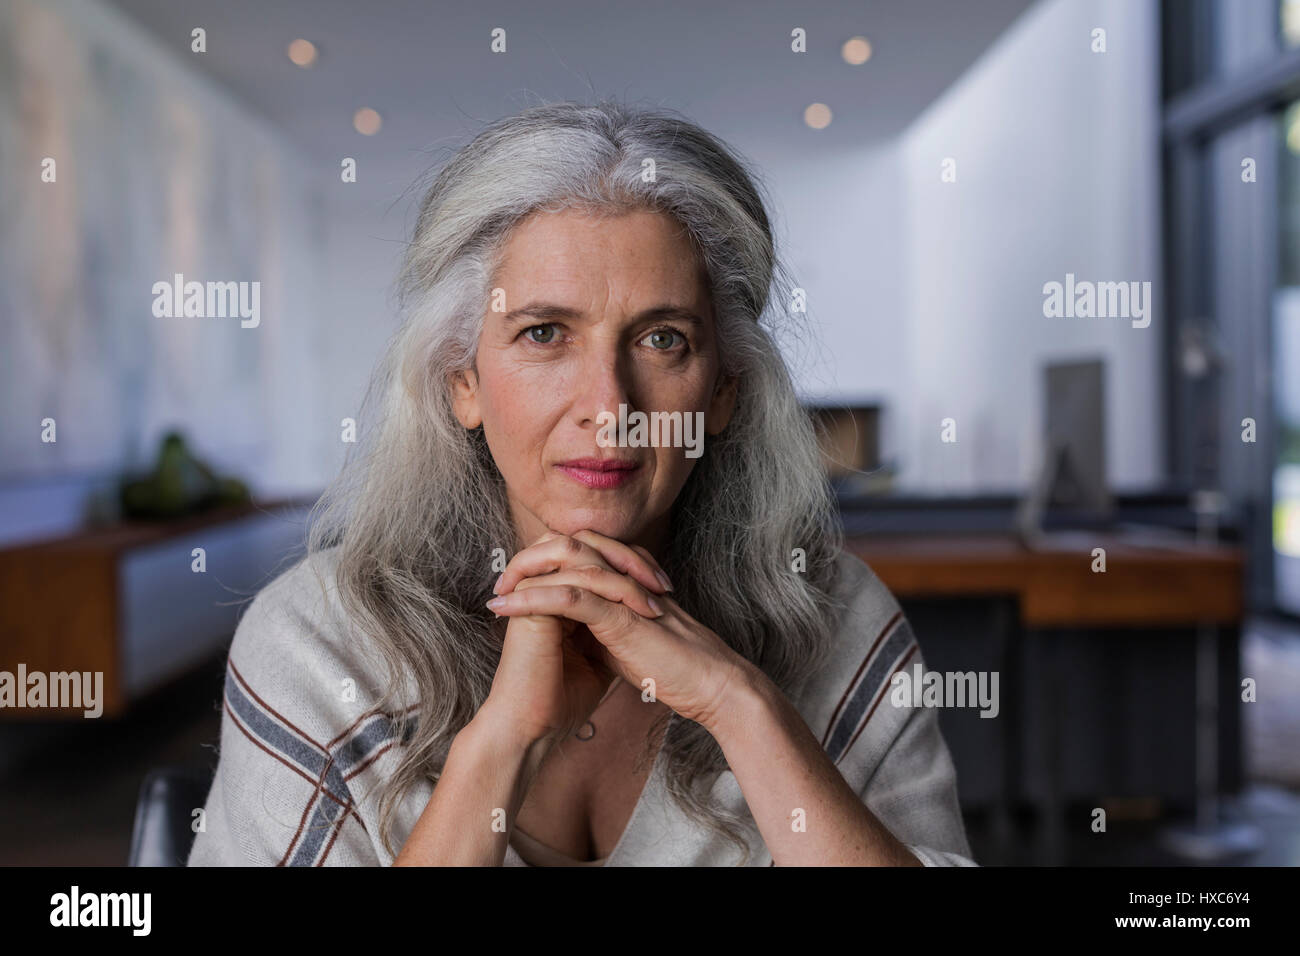 Portrait confident, serious mature woman with long, gray hair Stock Photo